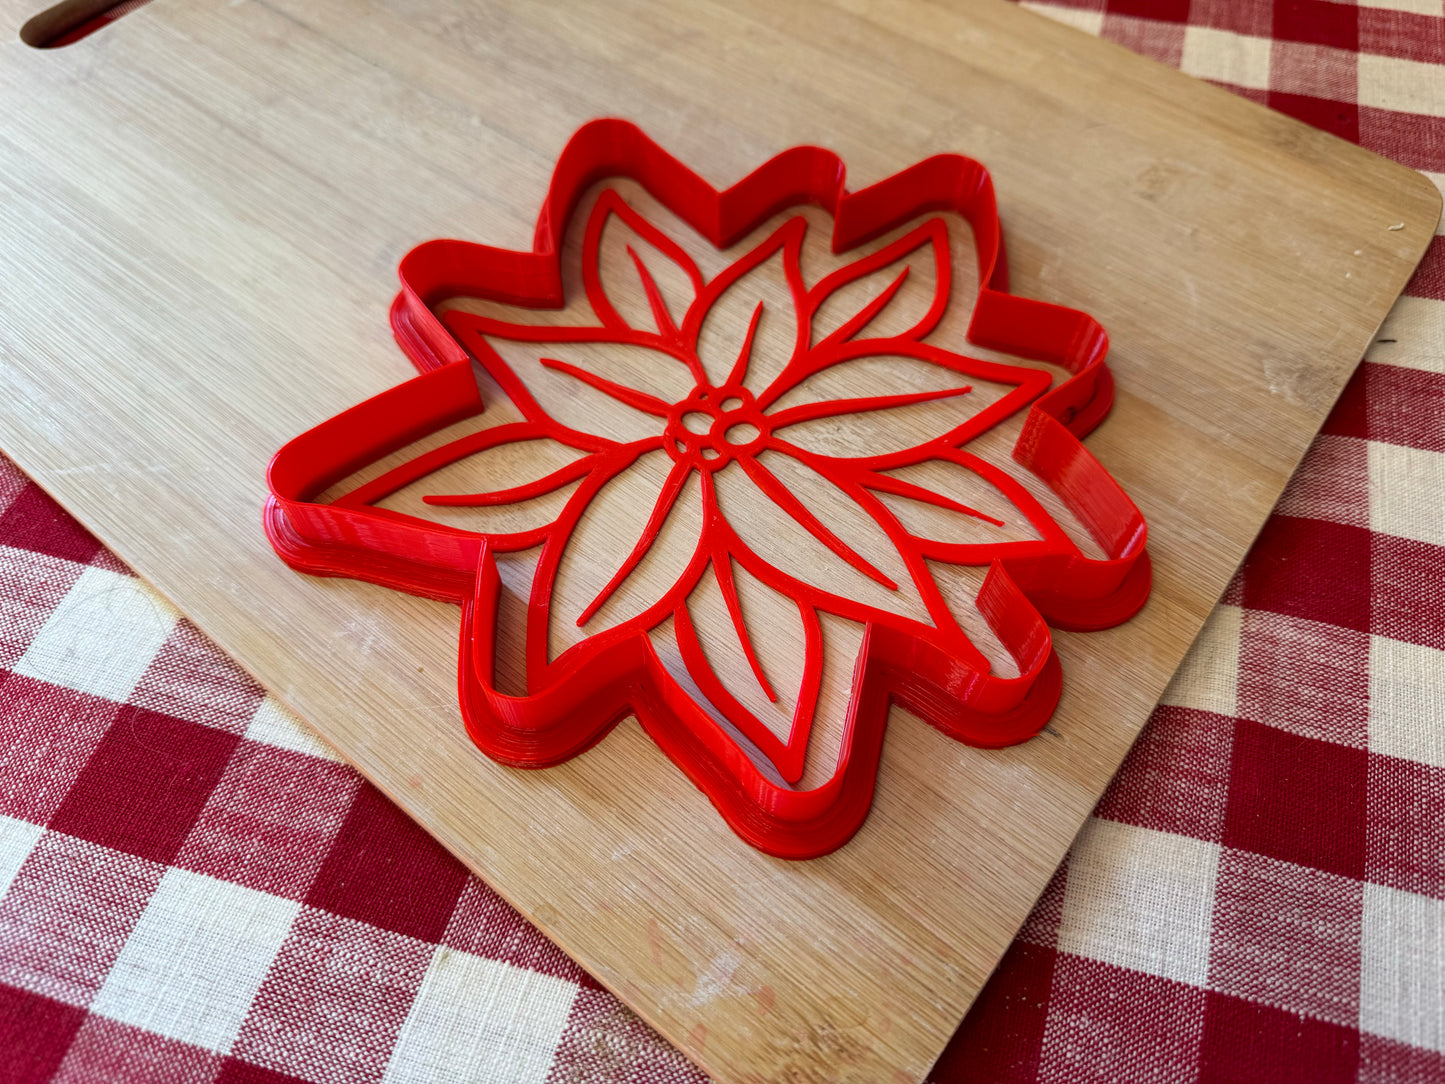 Poinsettia Design, Pottery Stamp or Stencil w/ optional cutter - plastic 3d printed, multiple sizes available